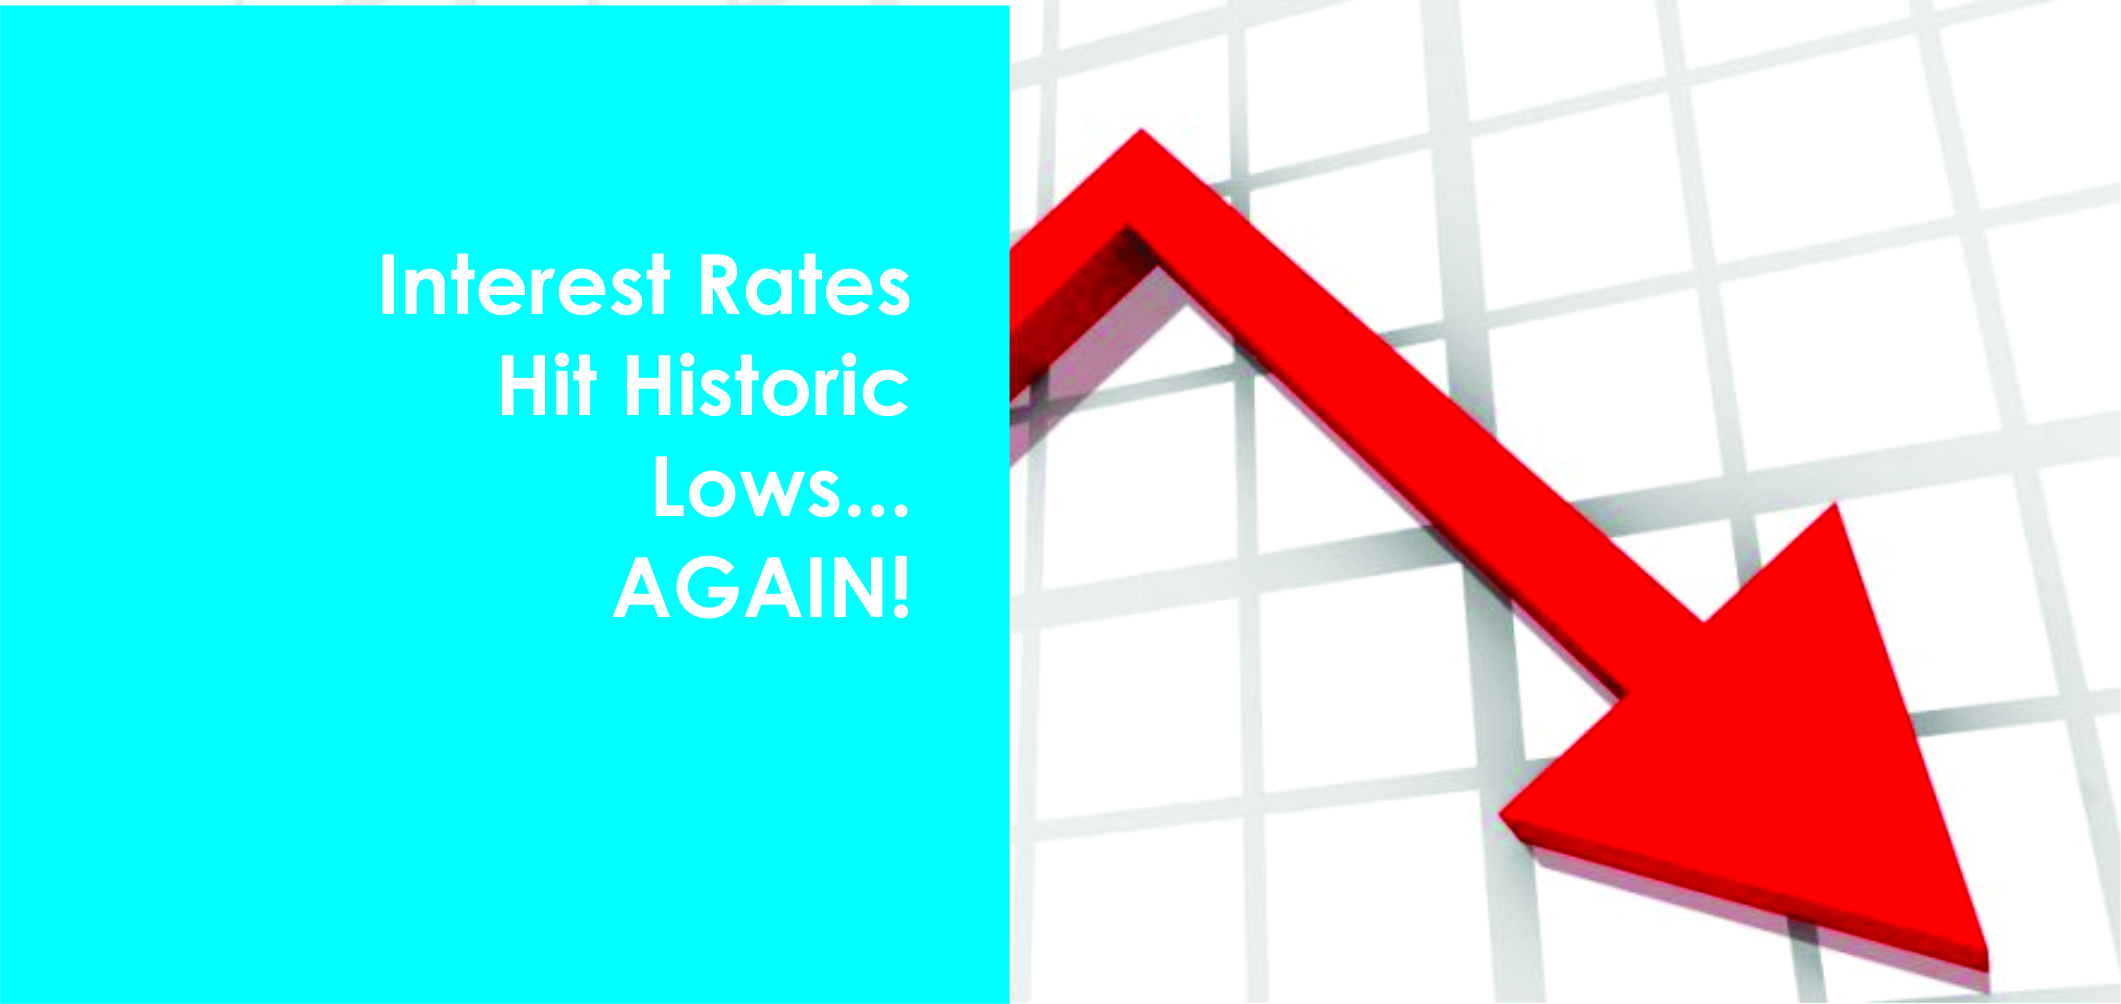 Interest Rates hit Historic Low in 2020, real estate spikes.